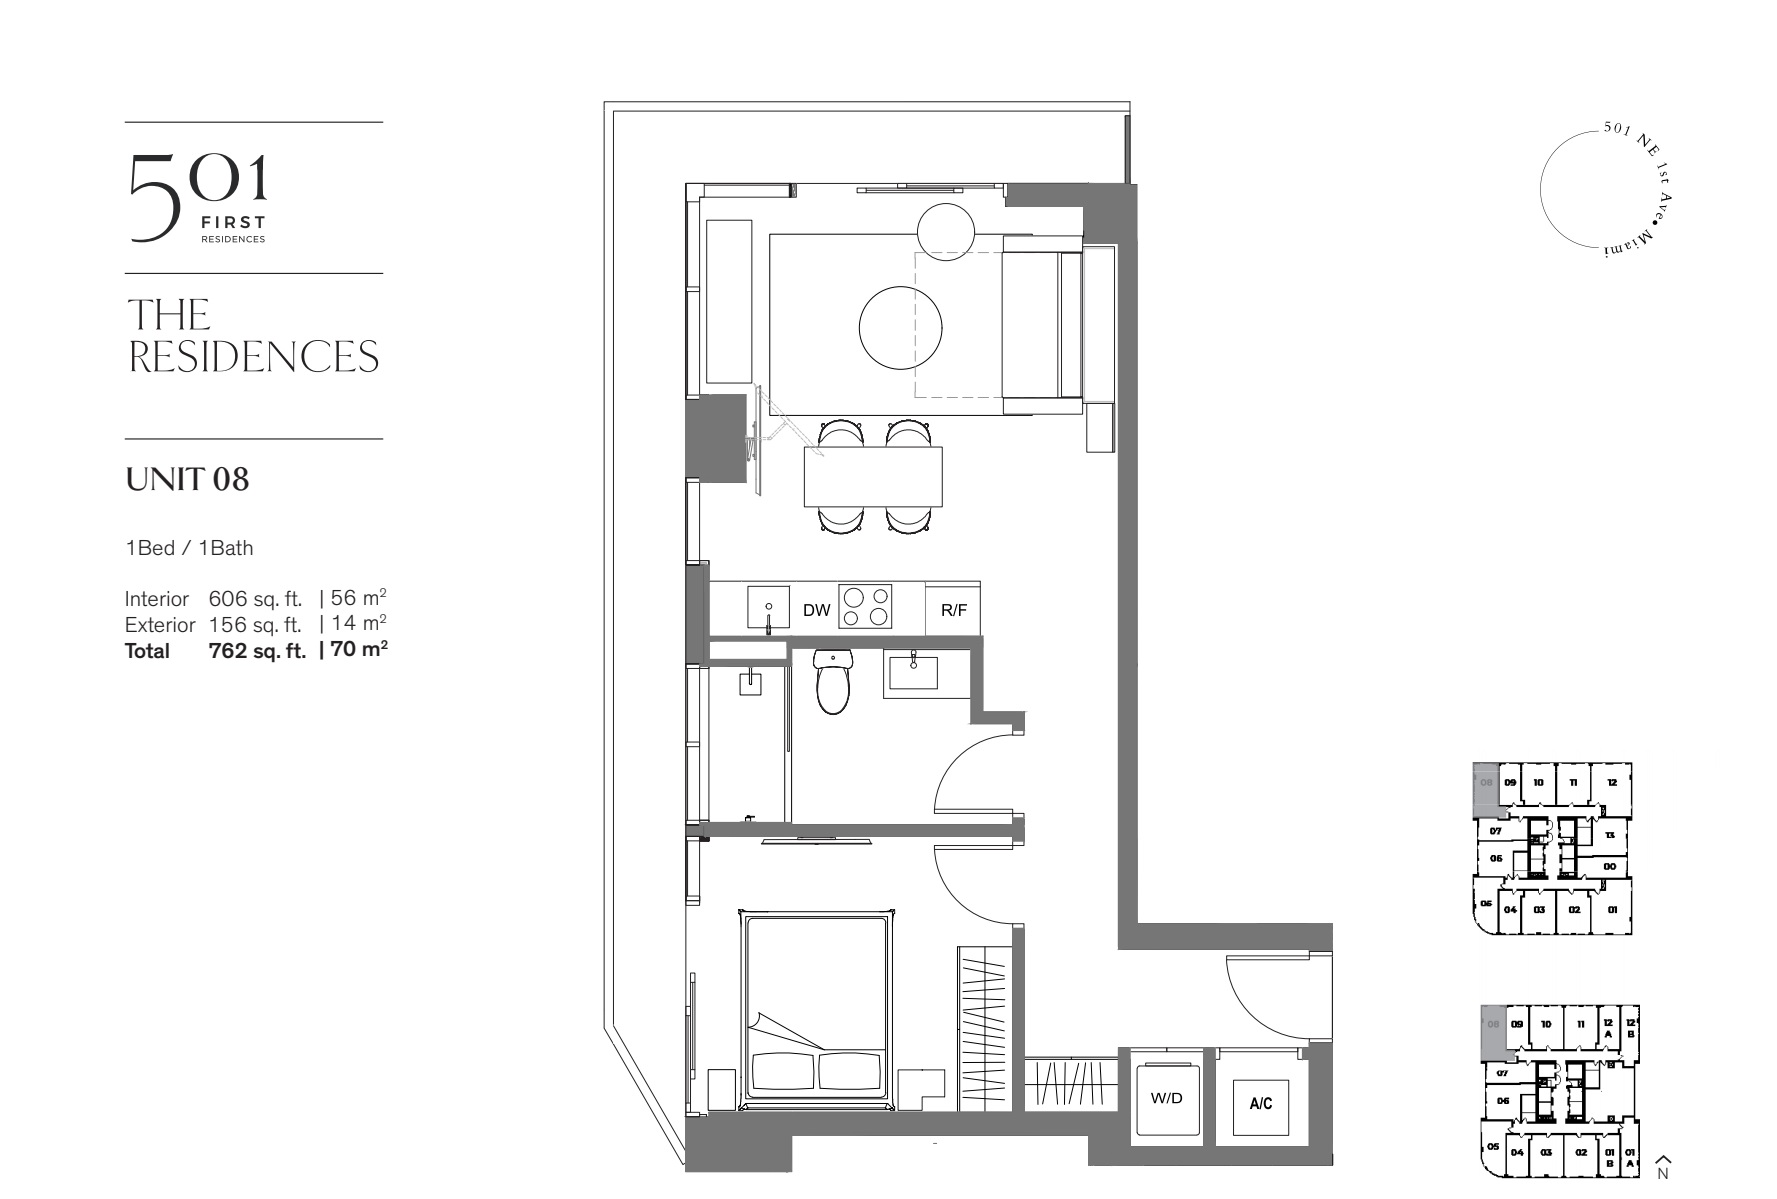 501 FIRST Residences Unit 08